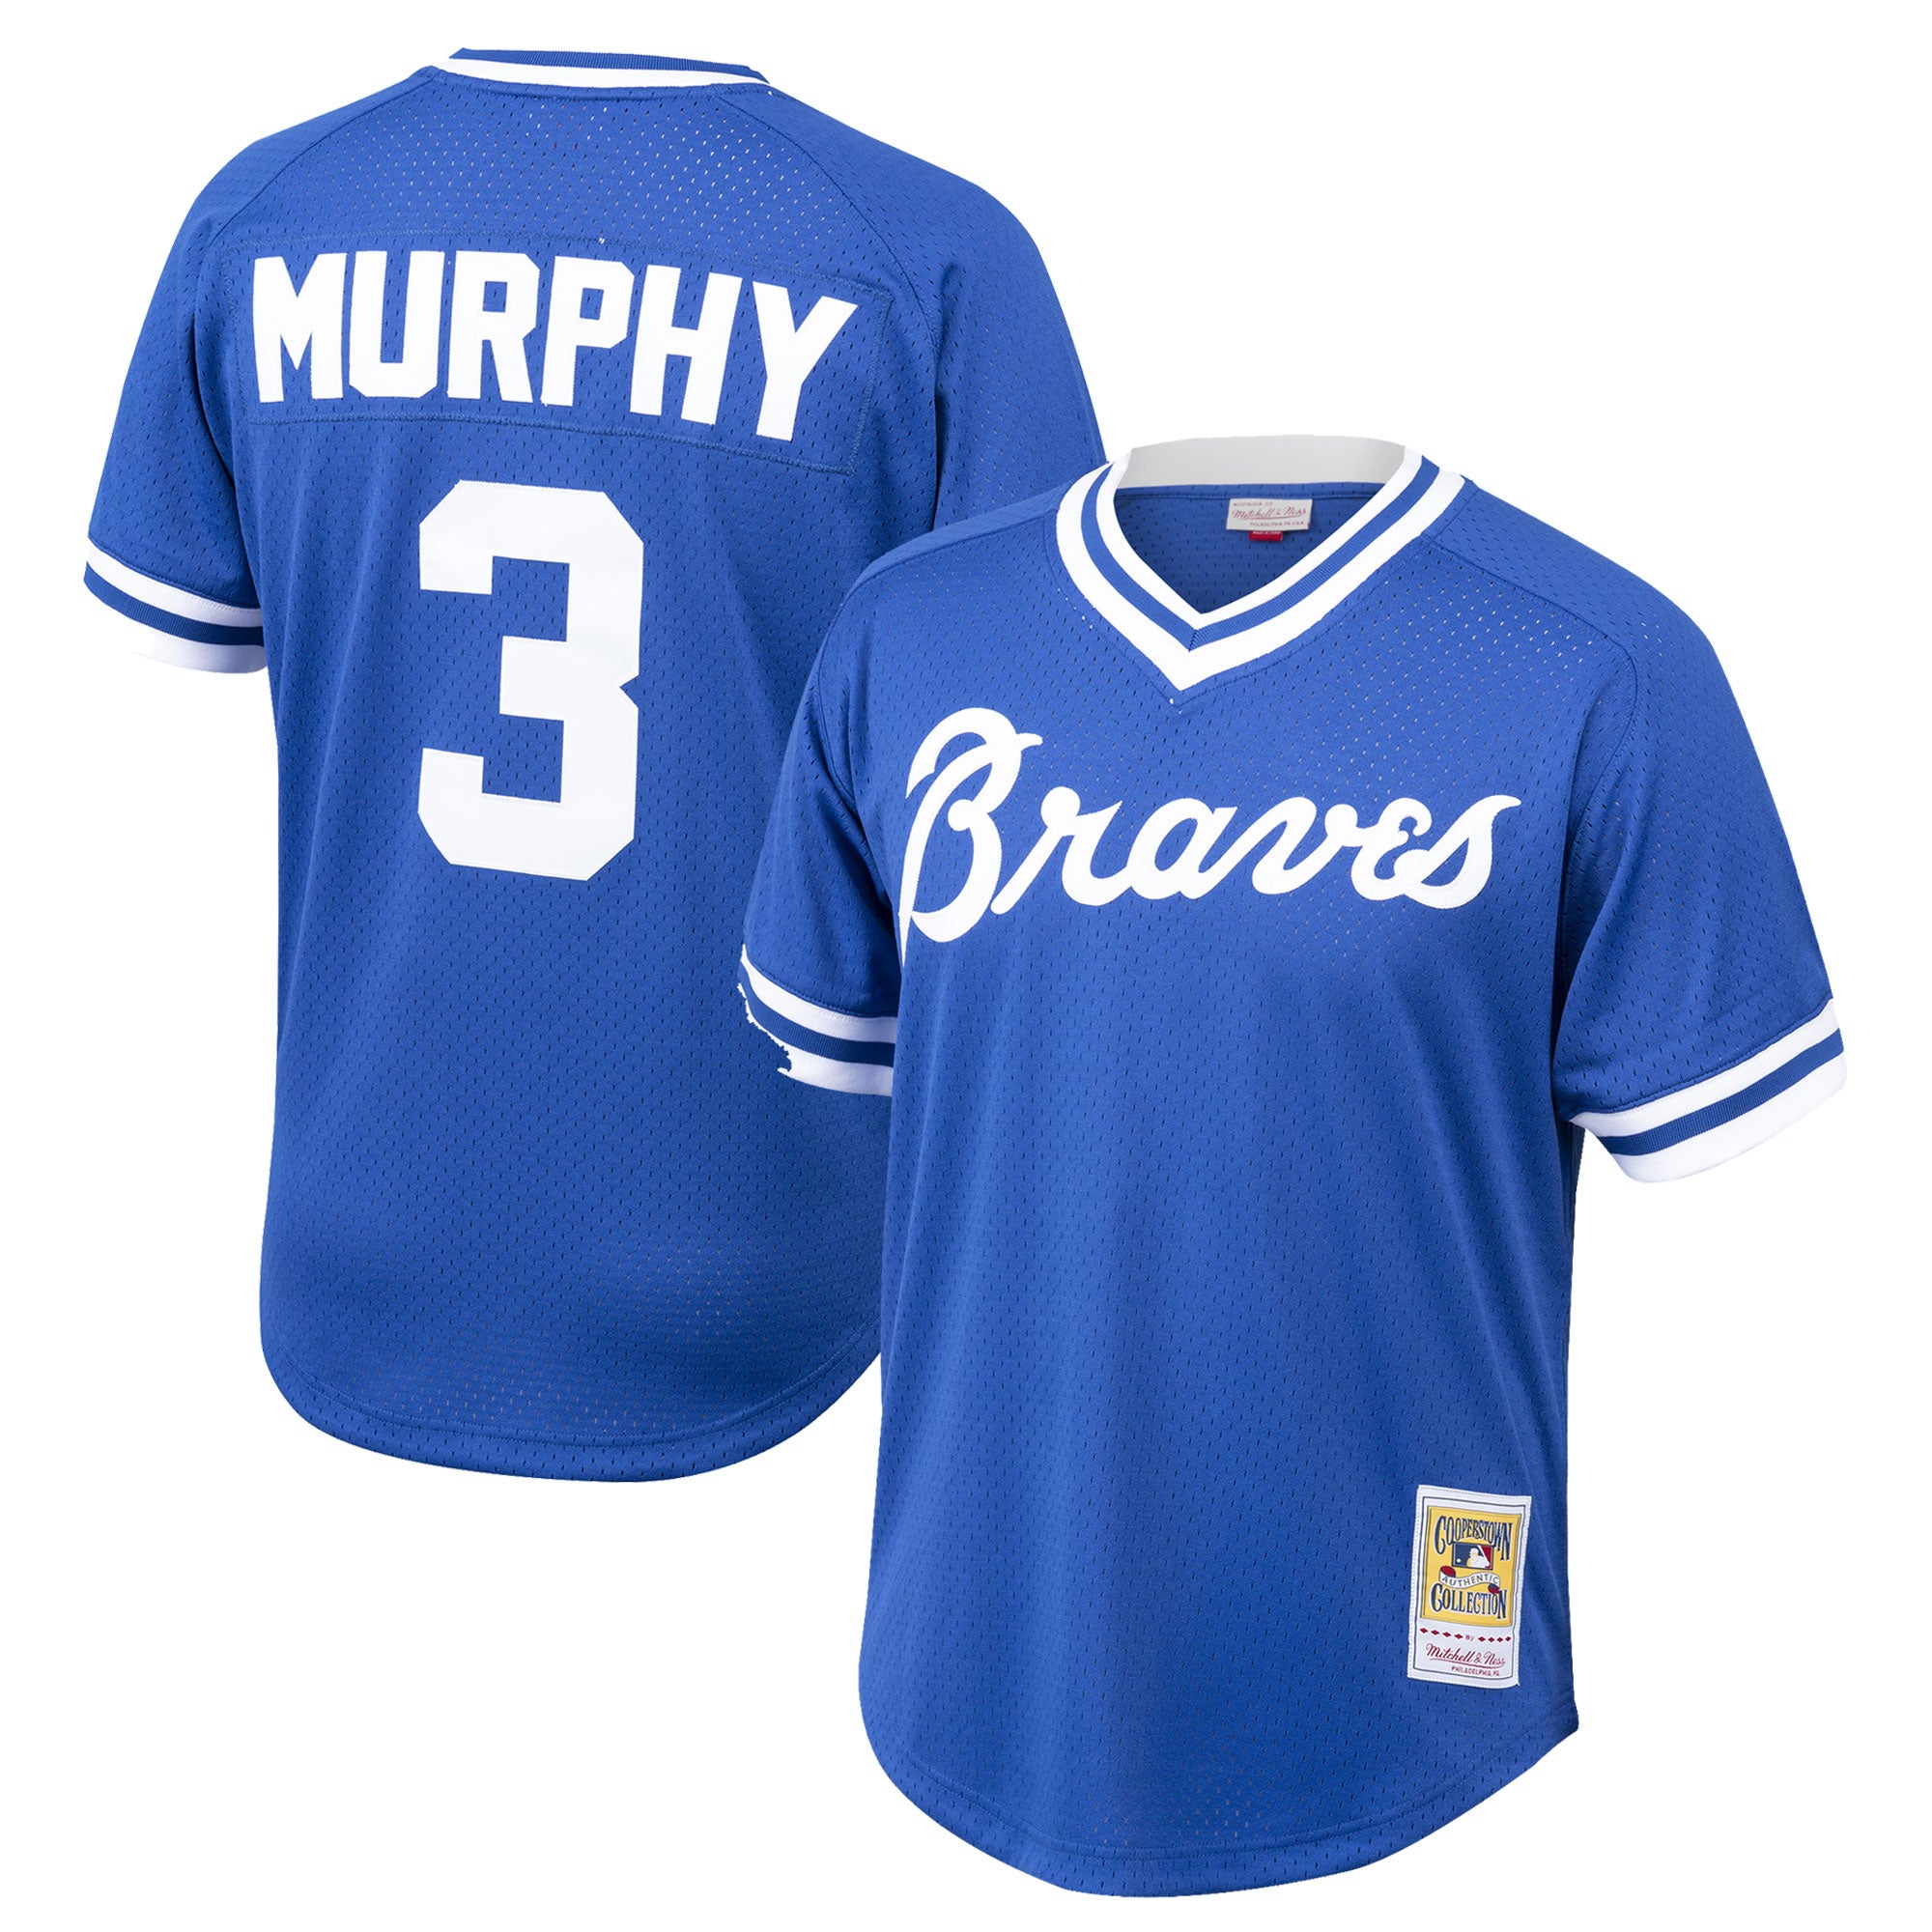 Mitchell & Ness Braves Cooperstown Mesh Batting Practice Jersey 